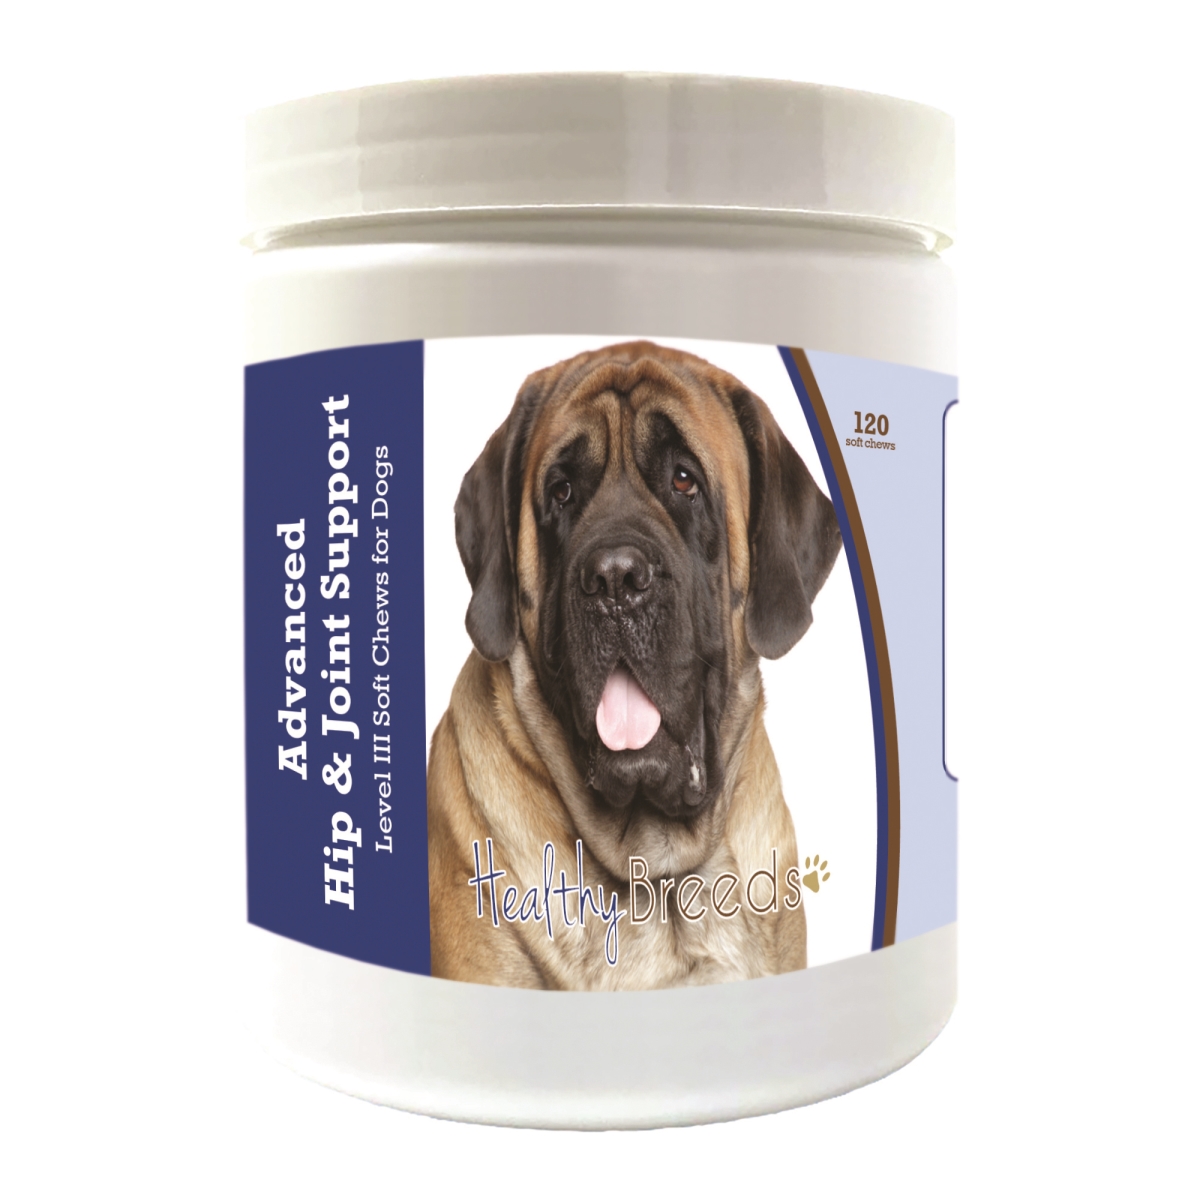 Picture of Healthy Breeds 192959898699 Mastiff Advanced Hip & Joint Support Level III Soft Chews for Dogs